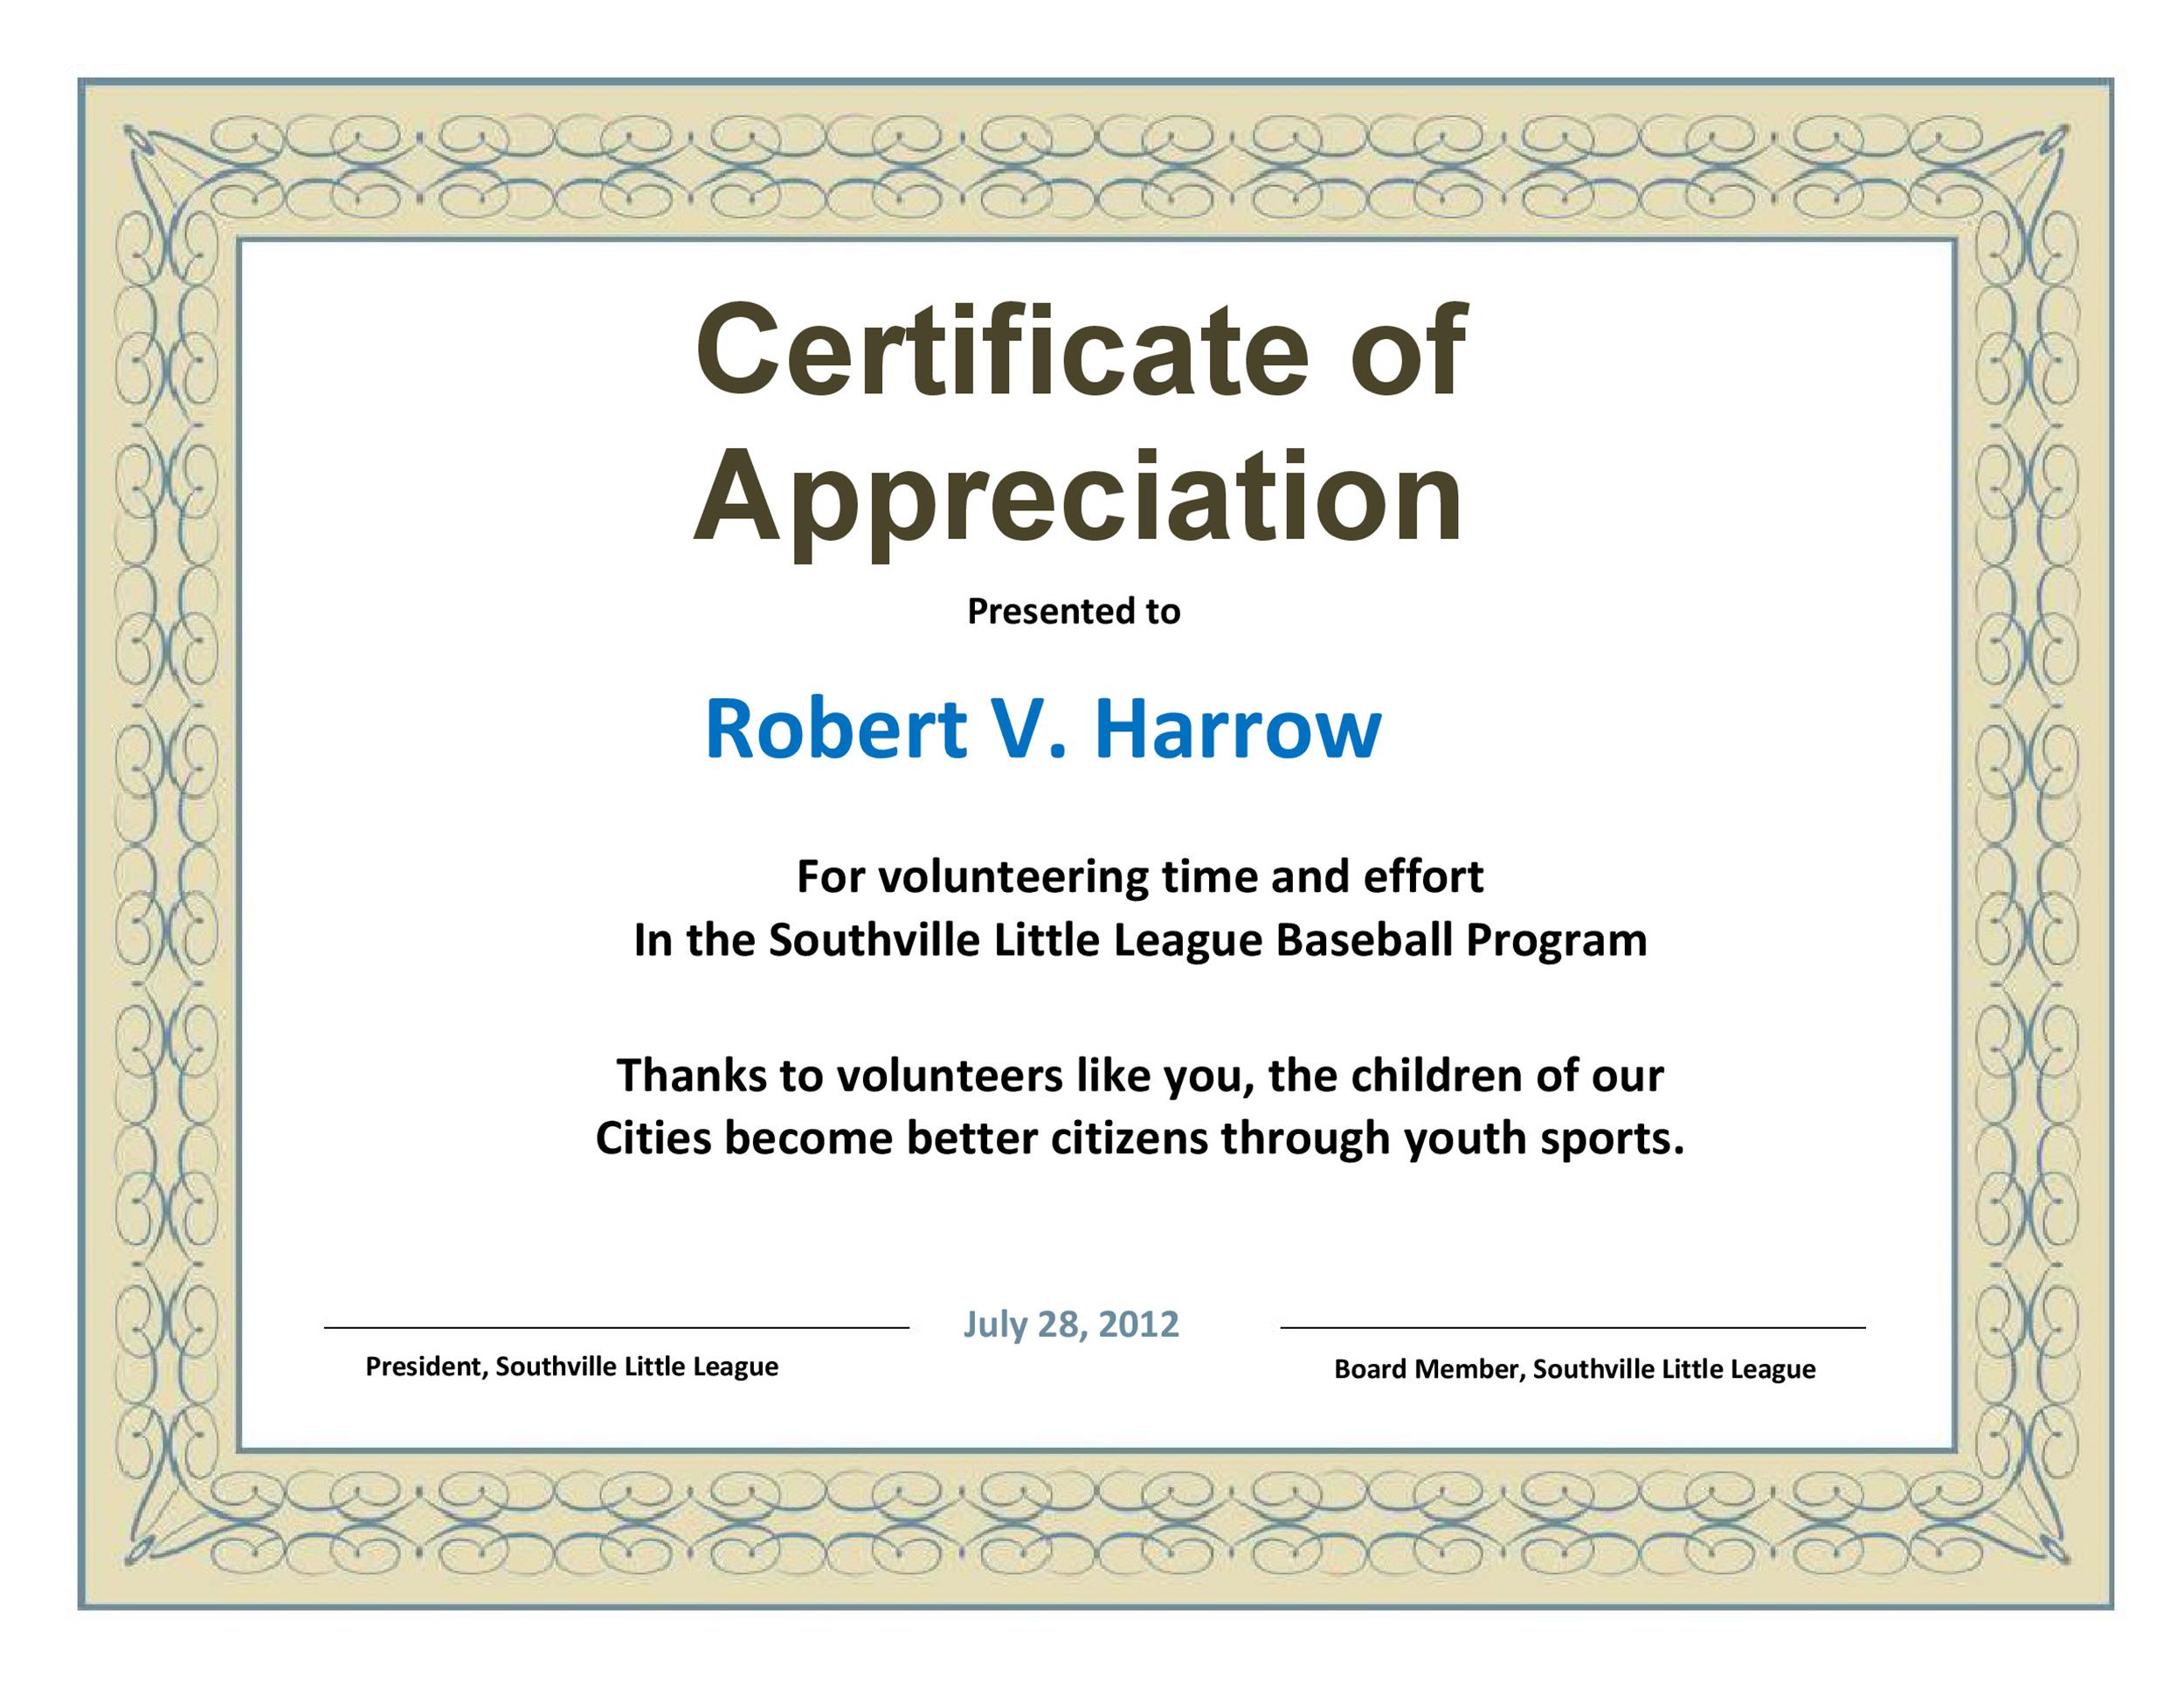 30-free-certificate-of-appreciation-templates-and-letters